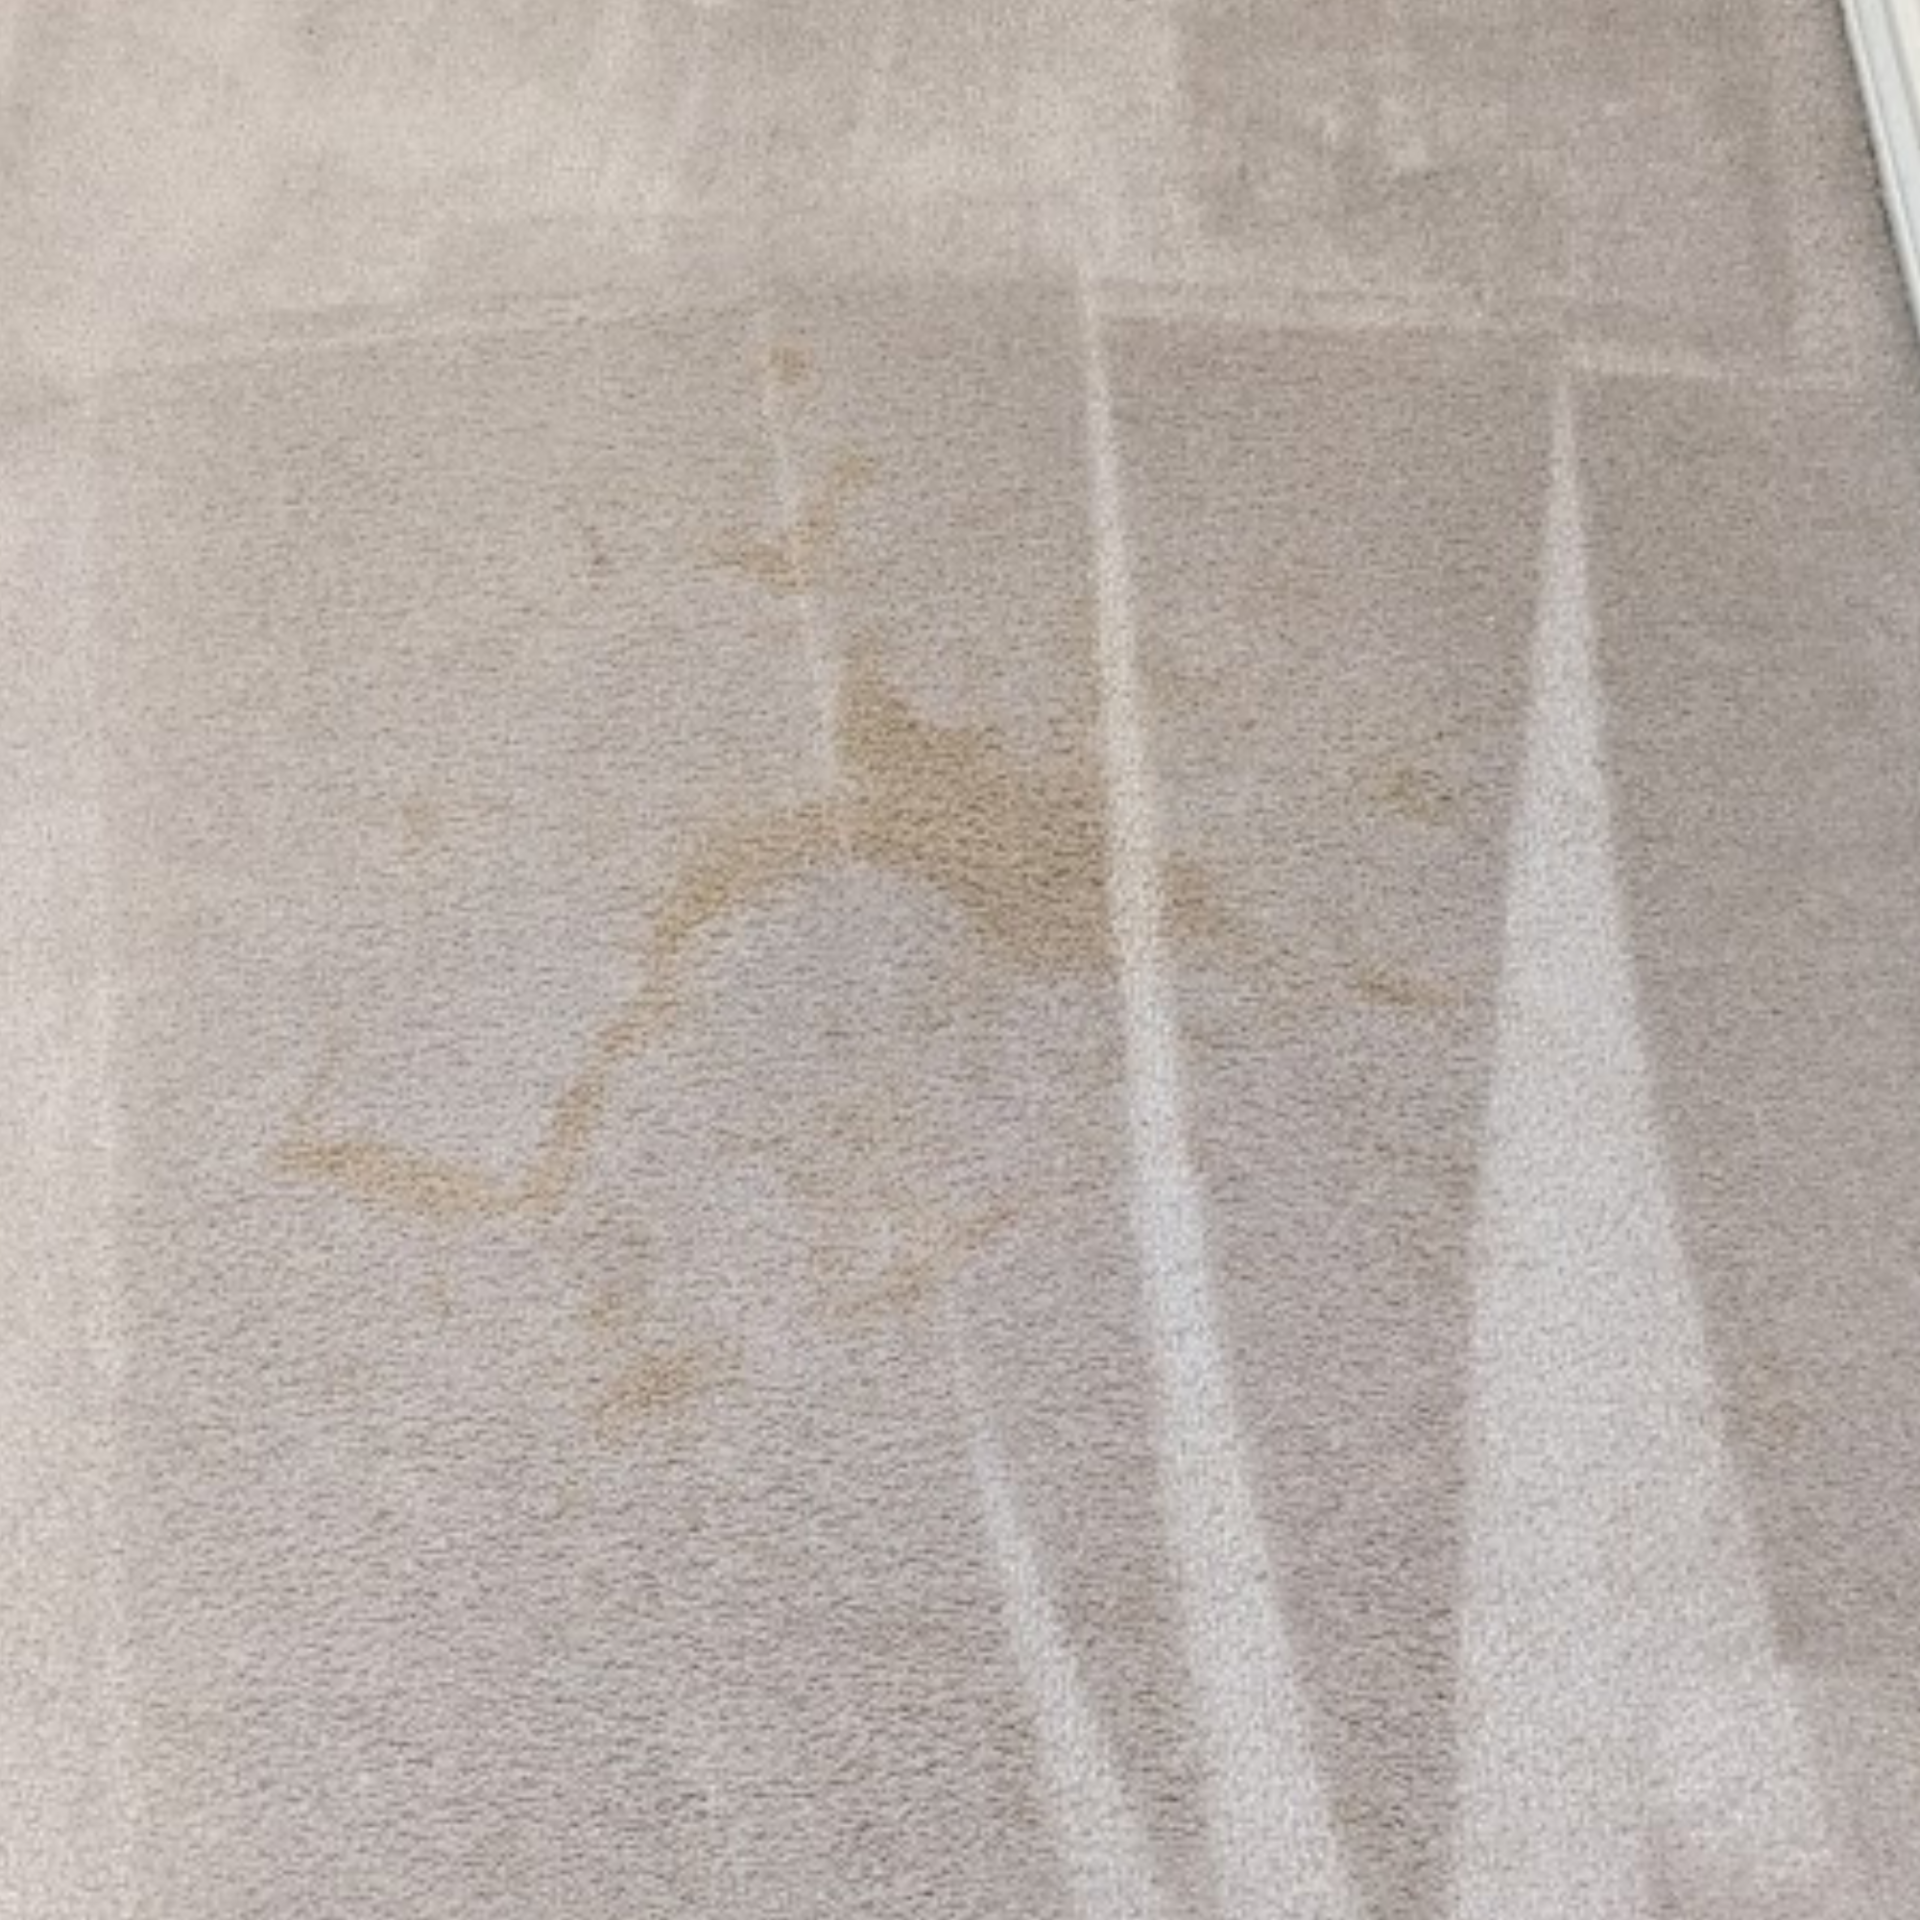 Carpet cleaning portland stain removal